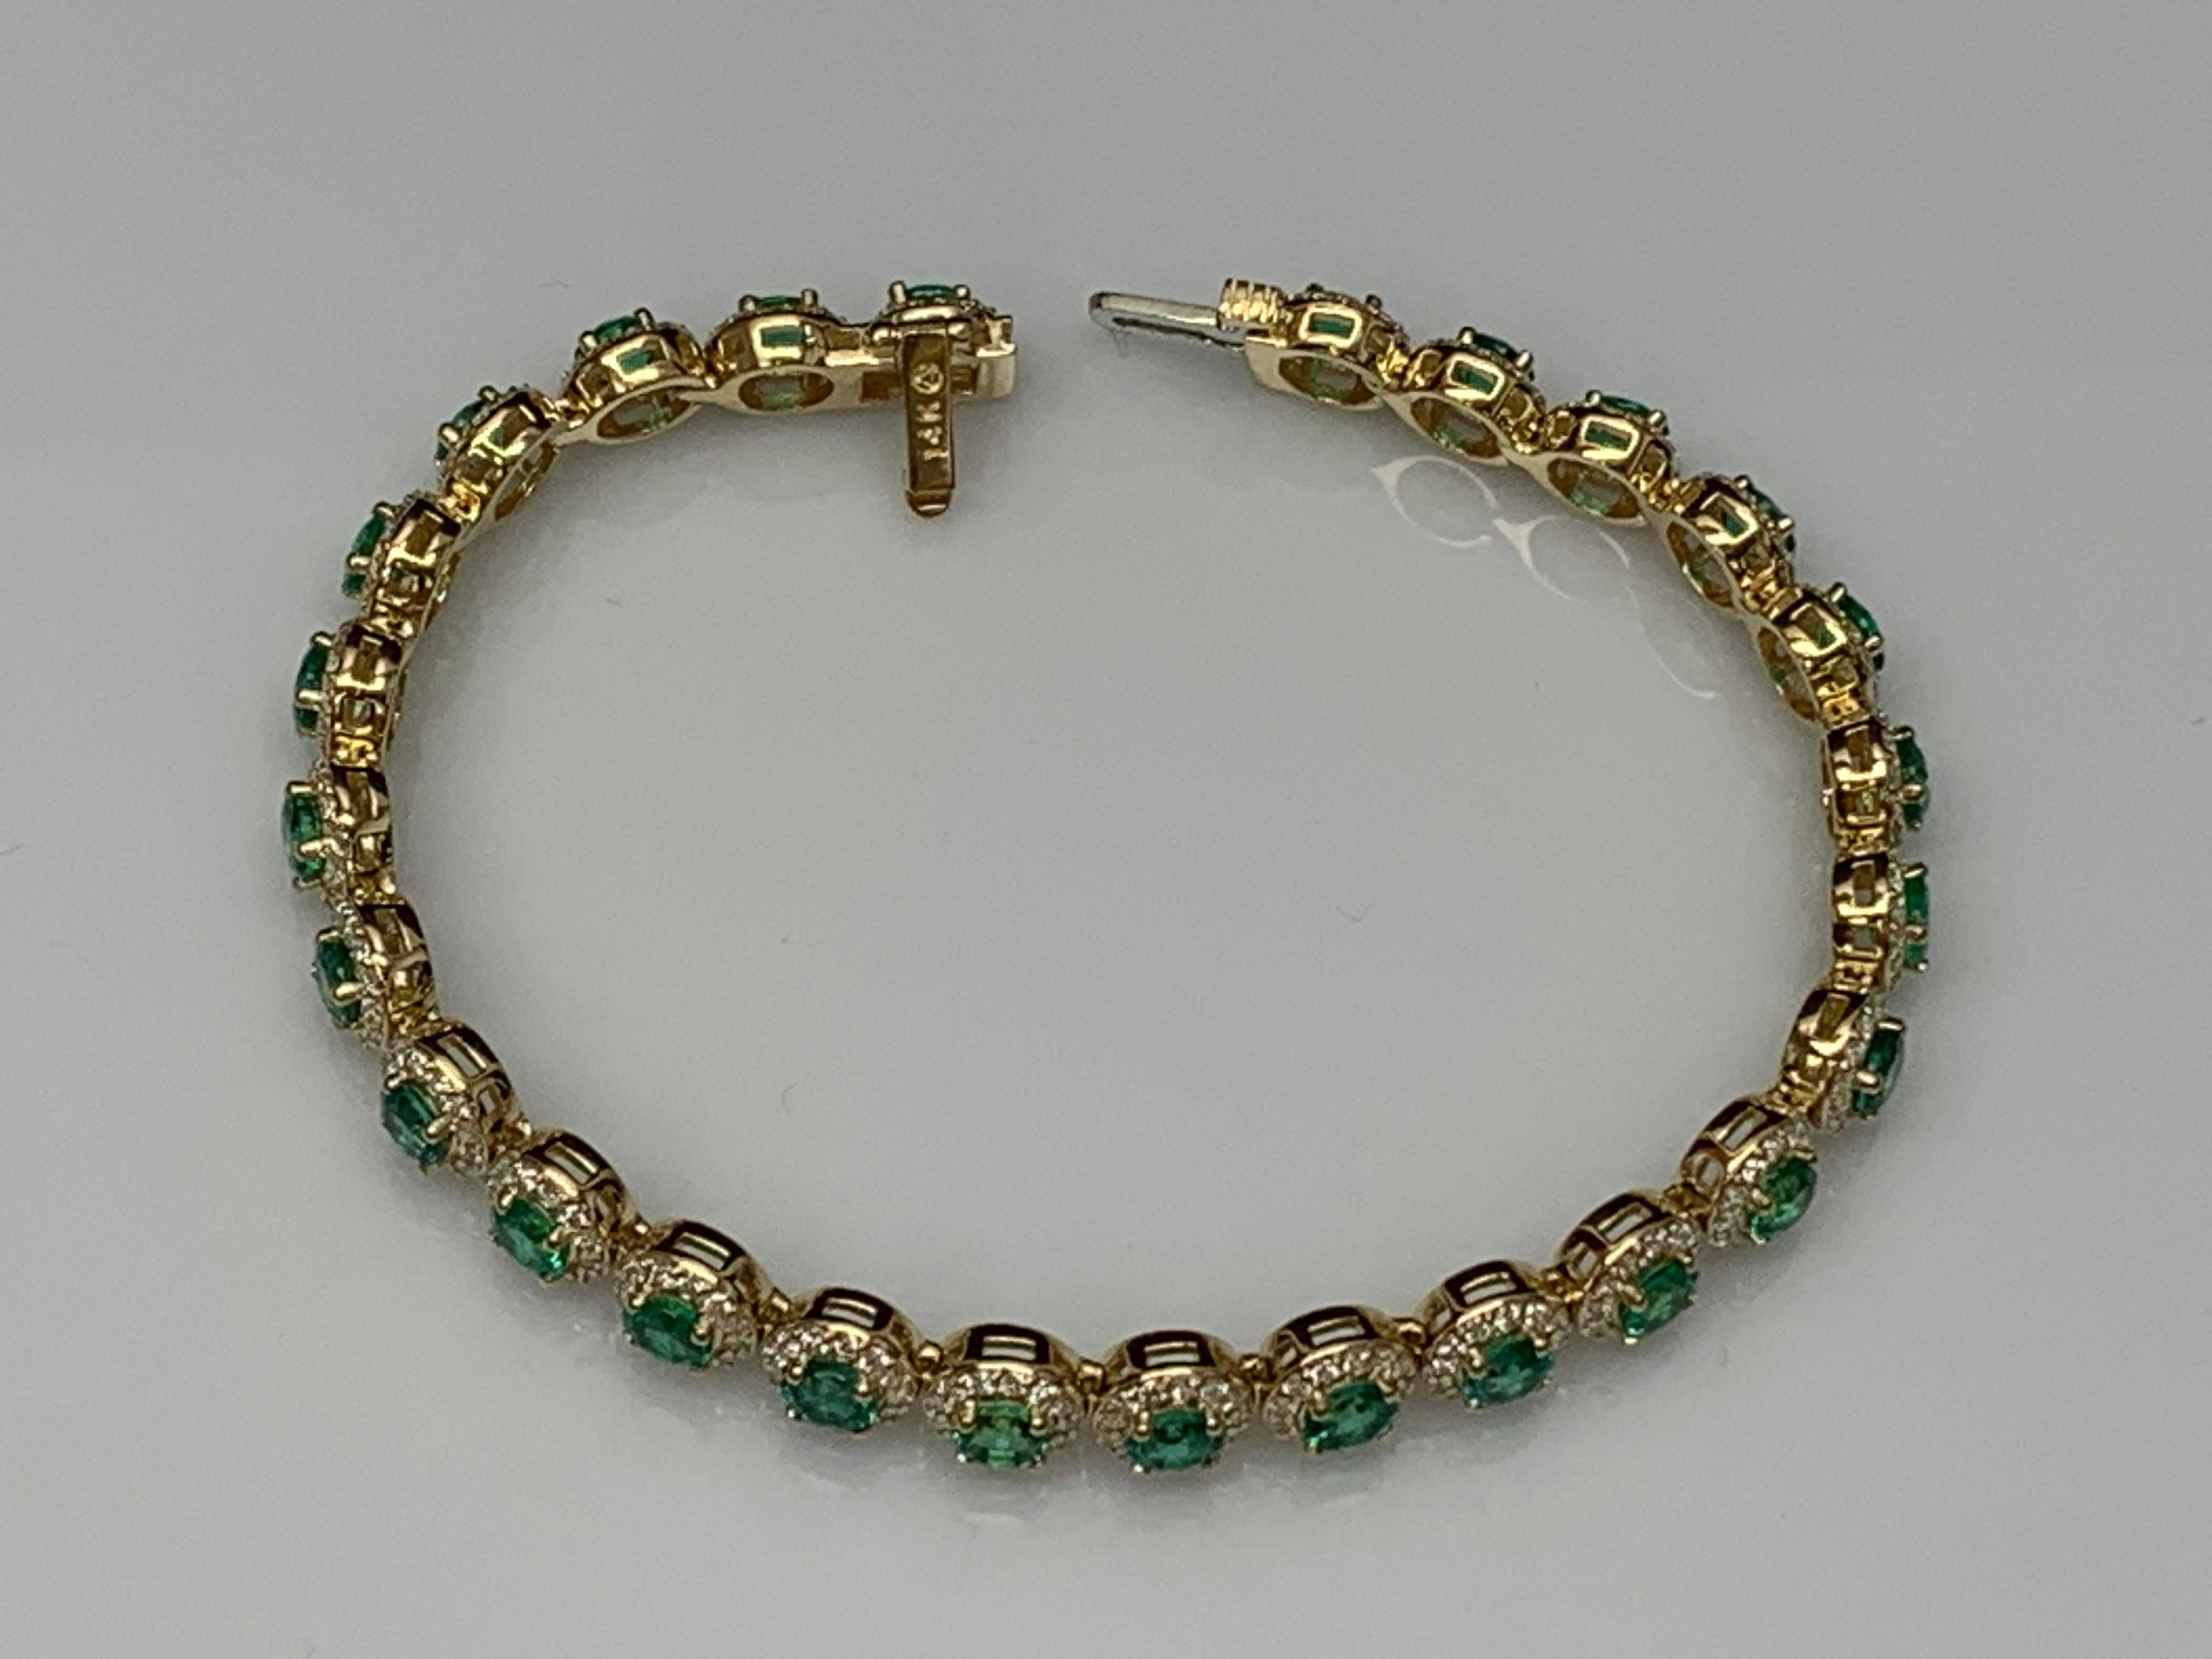 6.94 Carat Emerald and Diamond Halo Tennis Bracelet in 14k Yellow Gold For Sale 7